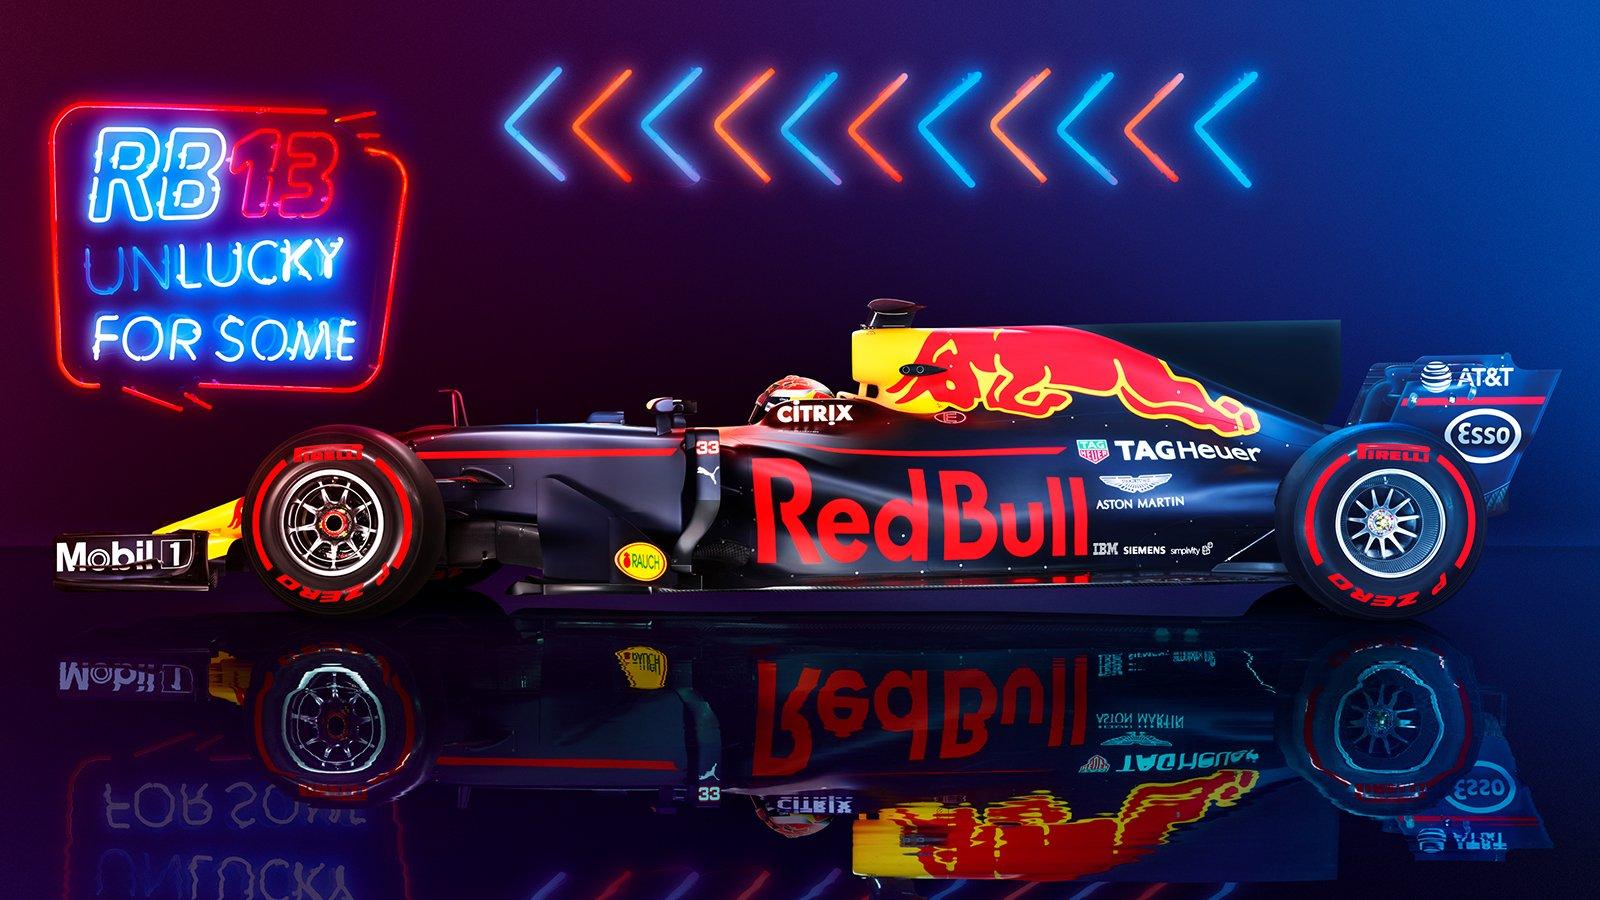 Red Bull Racing Honda the #RB13 home!